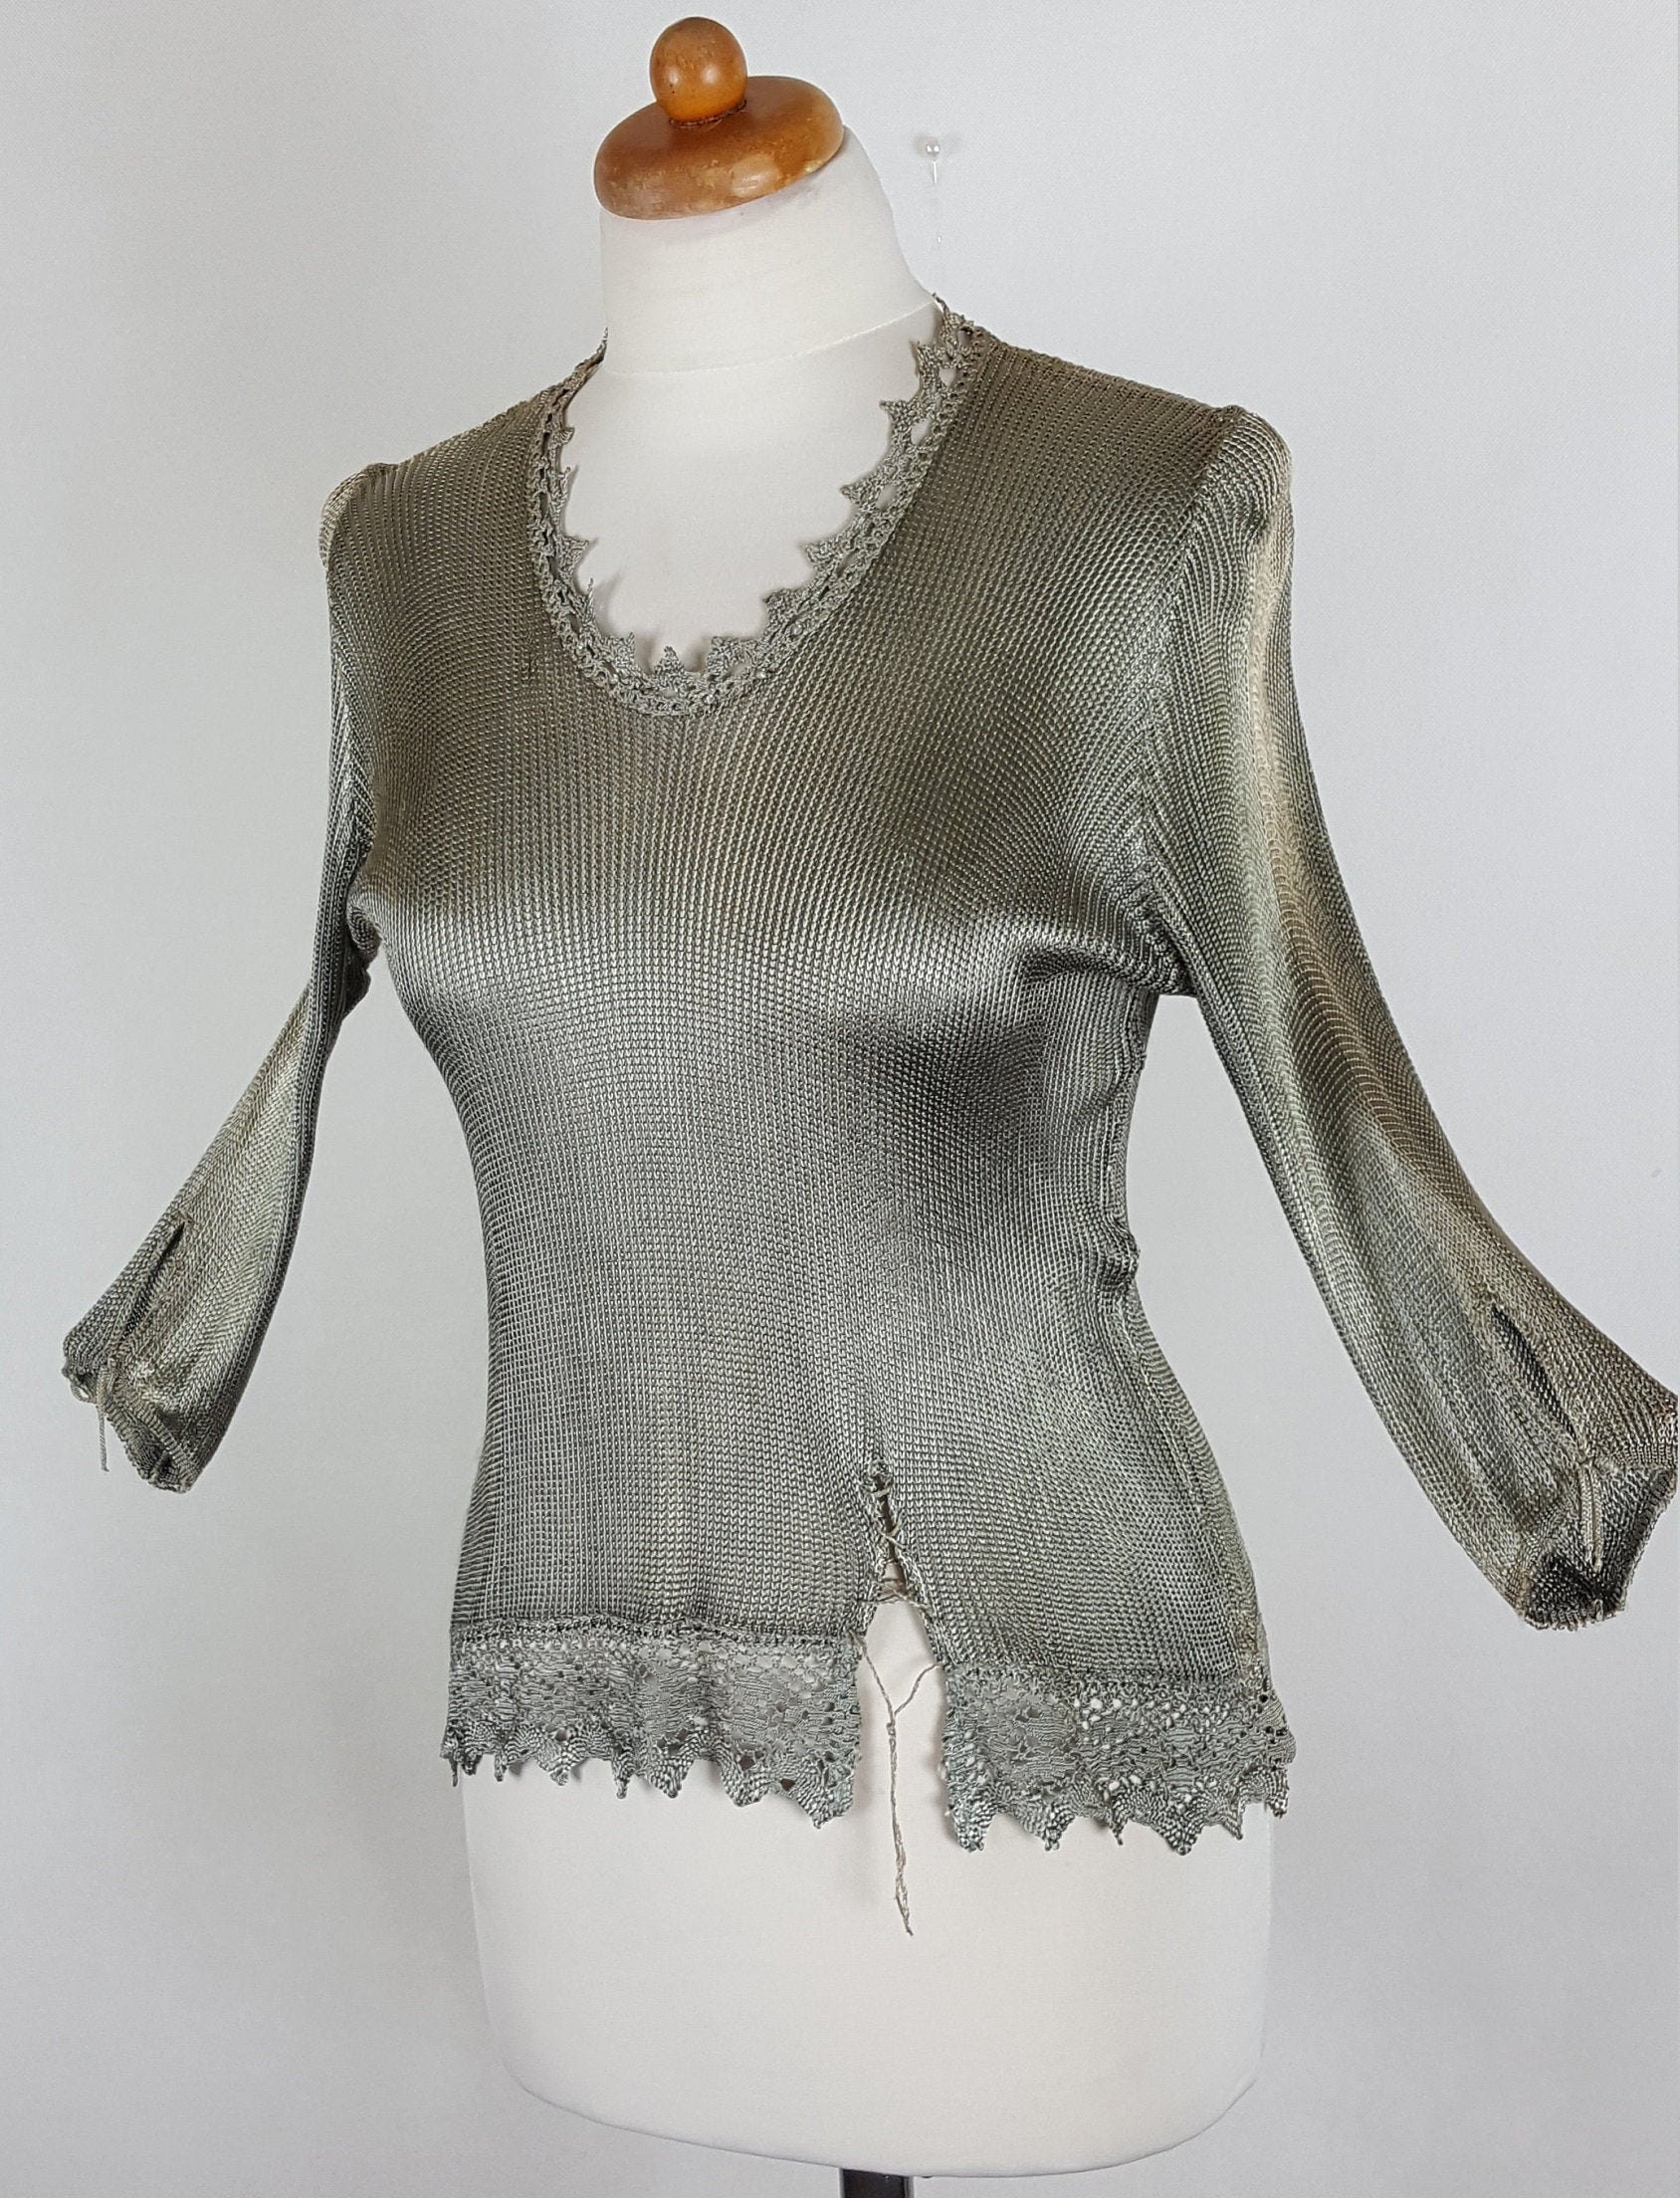 Blouse in Steel Color With Lace. Gray and Steel Blouse Made of - Etsy UK